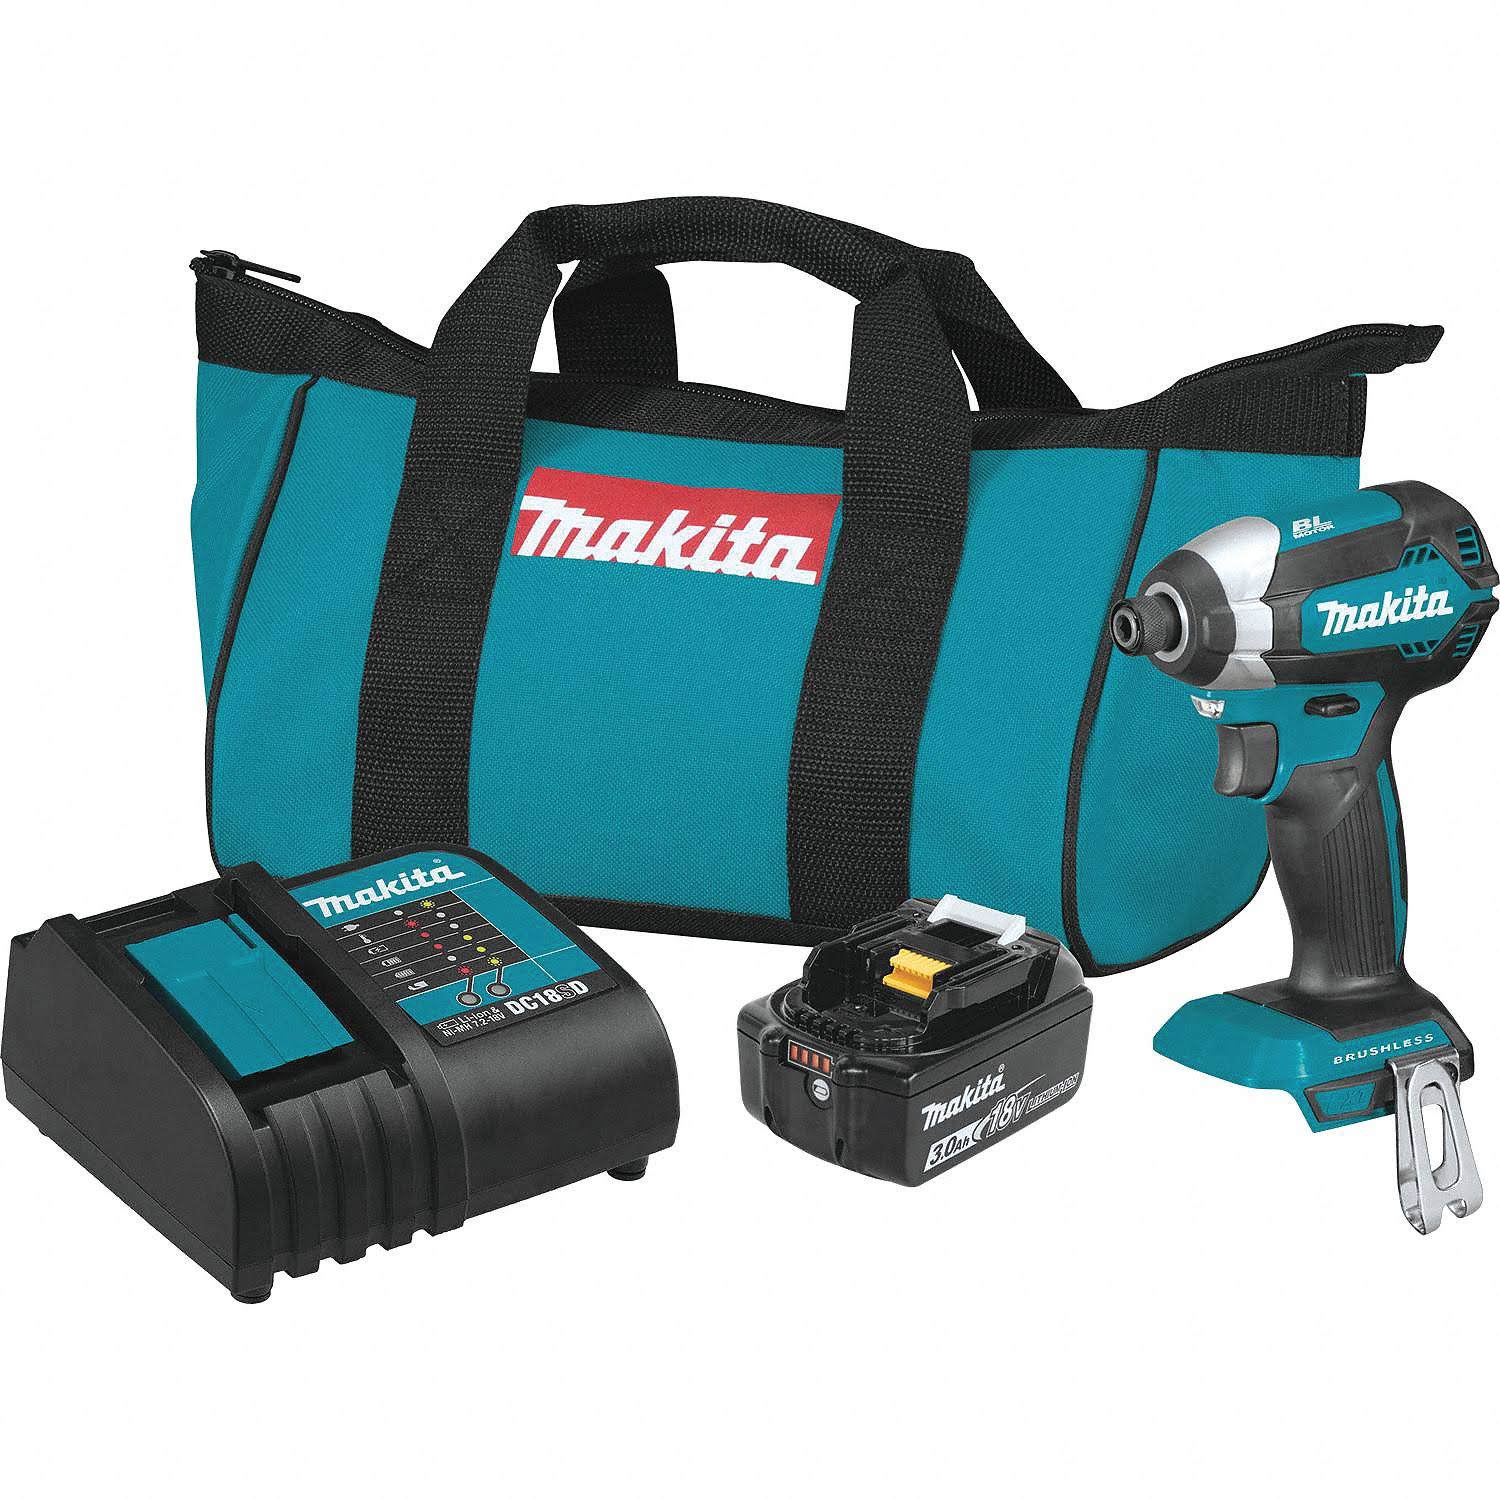 Makita Brushless Cordless Impact Driver Kit - with 18v LXT Lithium-Ion Battery